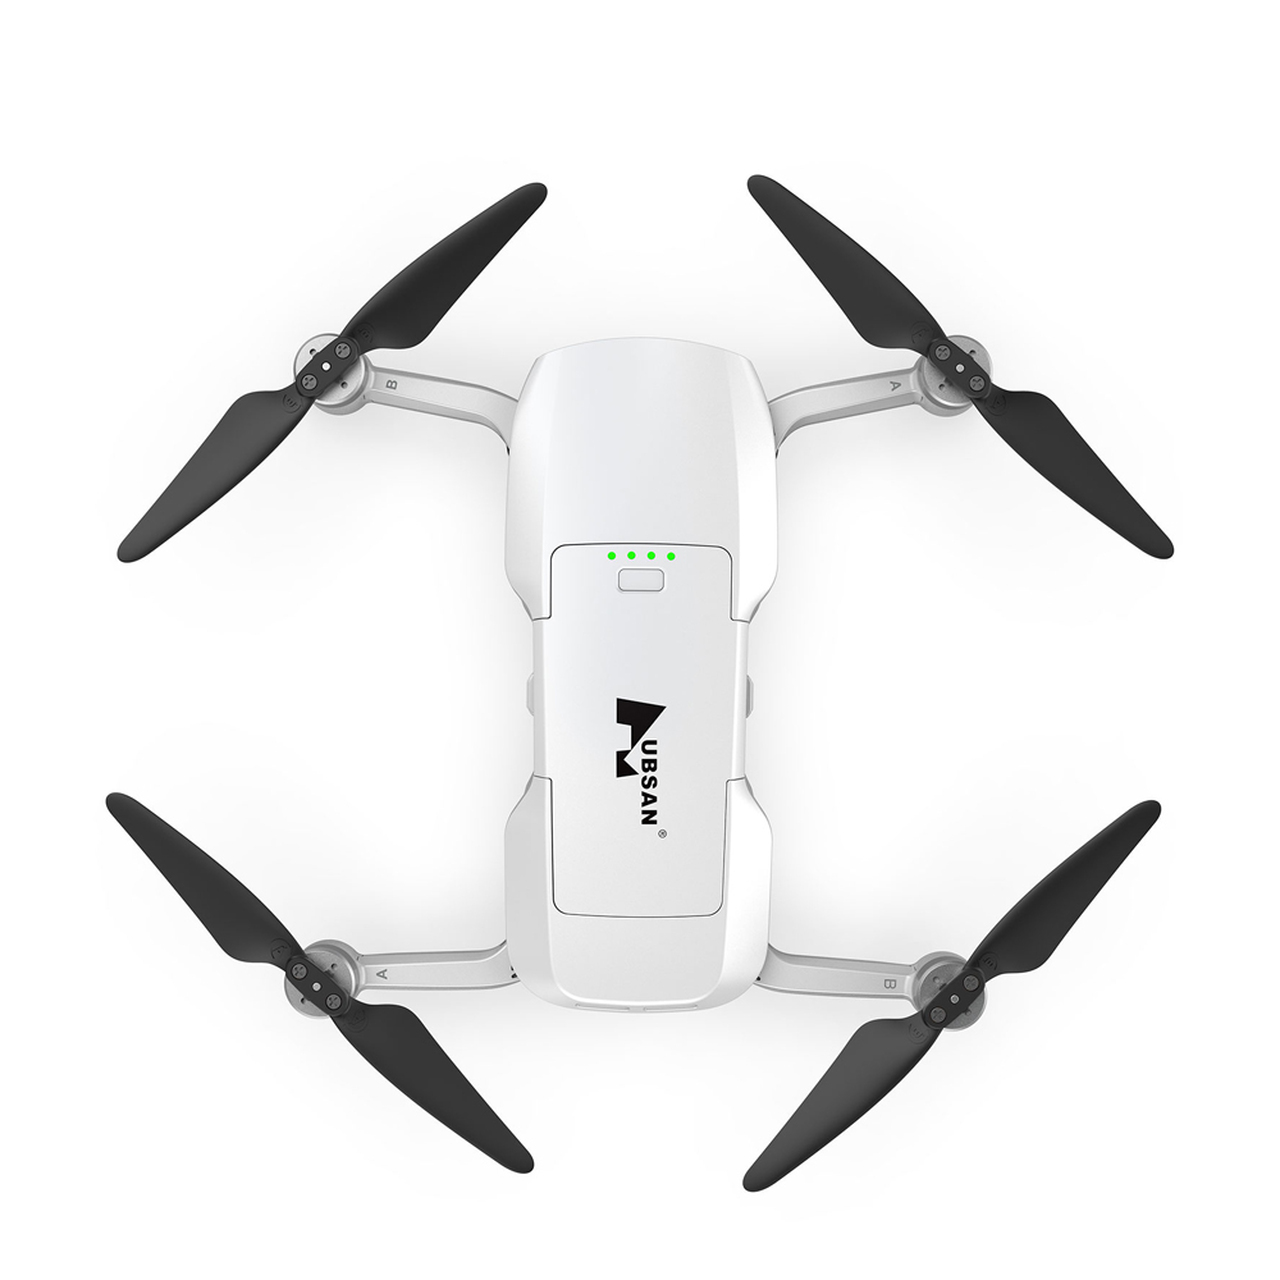 Find Hubsan ACE SE GPS 10KM 1080P FPV with 4K 30fps Camera 3-axis Gimbal 35mins Flight Time AVT 3.0 Tracking RC Drone Quadcopter RTF for Sale on Gipsybee.com with cryptocurrencies